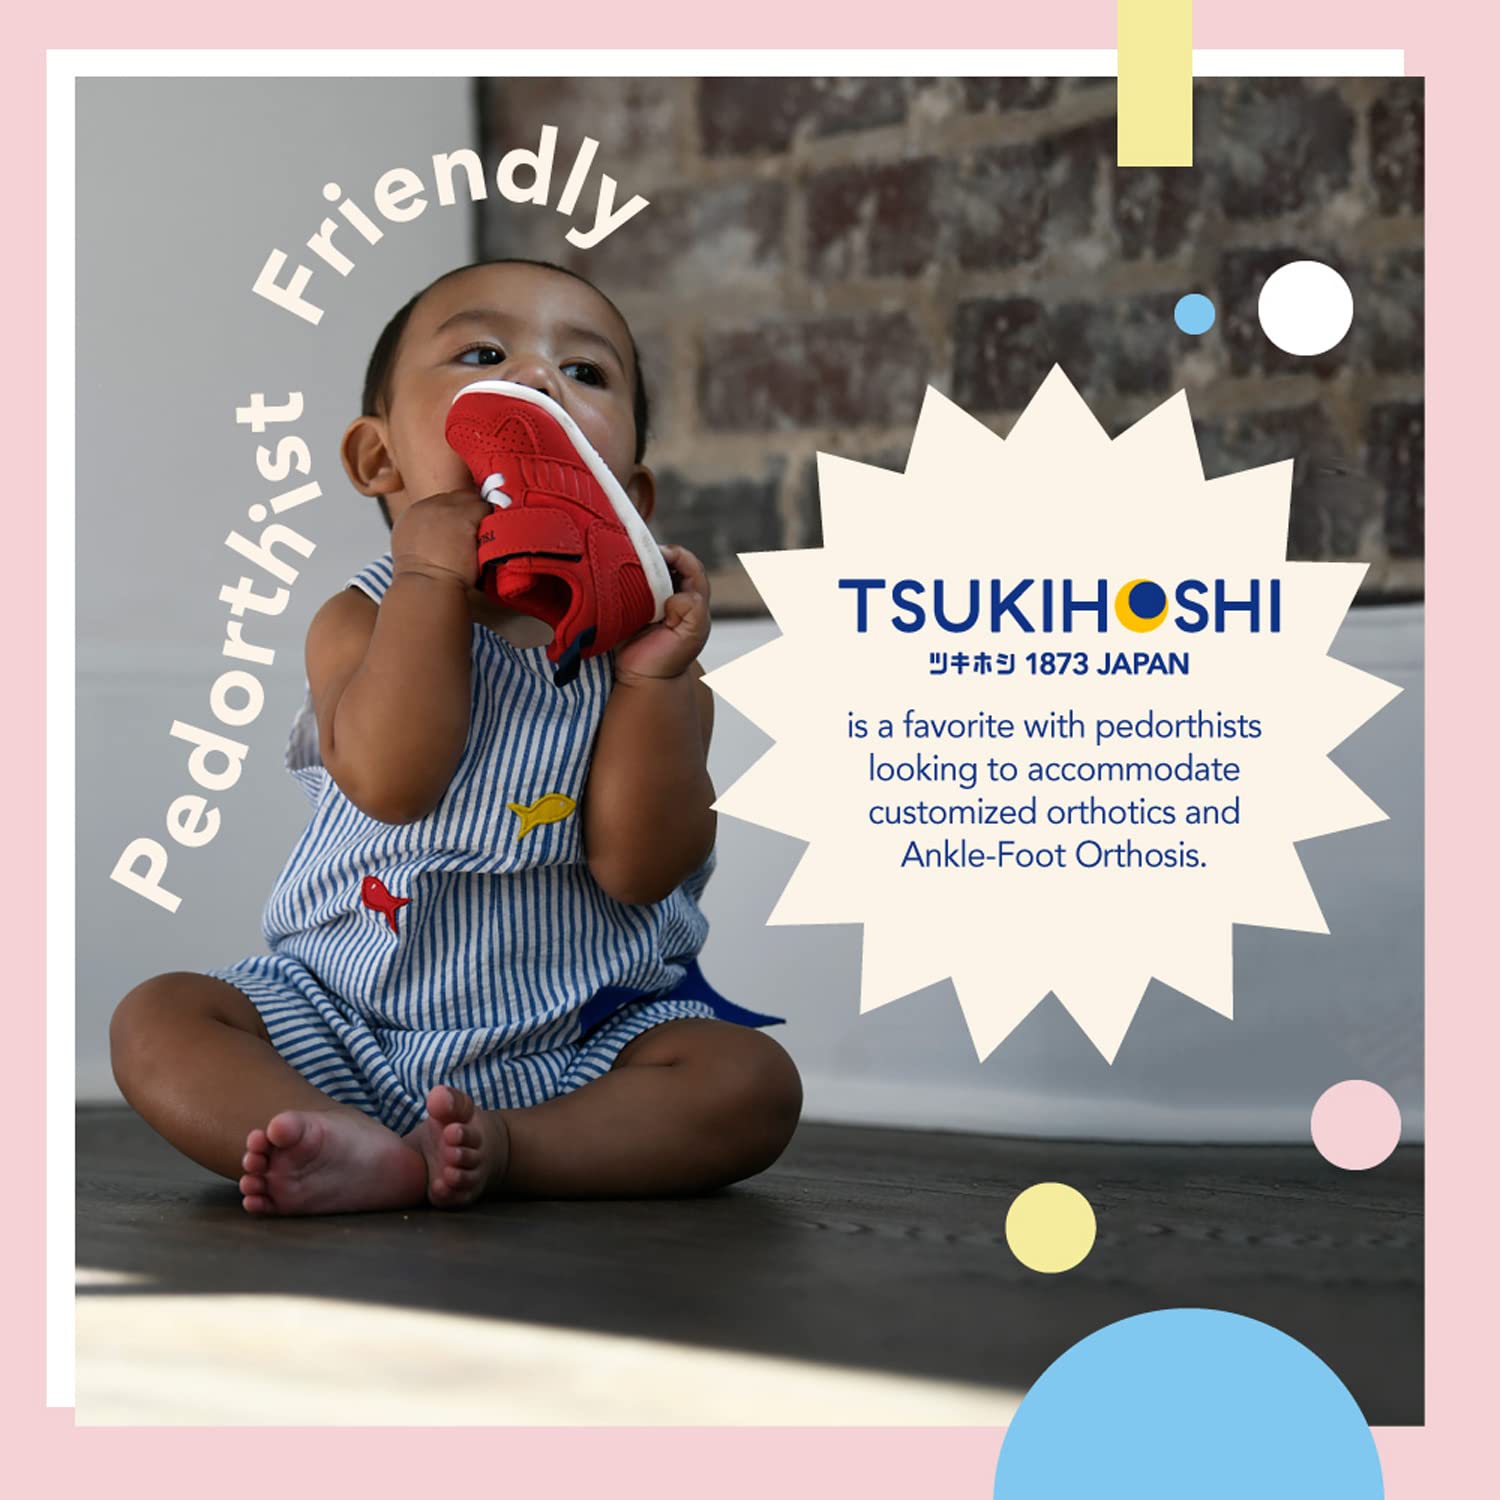 TSUKIHOSHI 2510 Racer Strap-Closure Machine-Washable Baby Sneaker Shoe with Wide Toe Box and Slip-Resistant, Non-Marking Outsole - for Infants and Toddlers, Ages 0-4